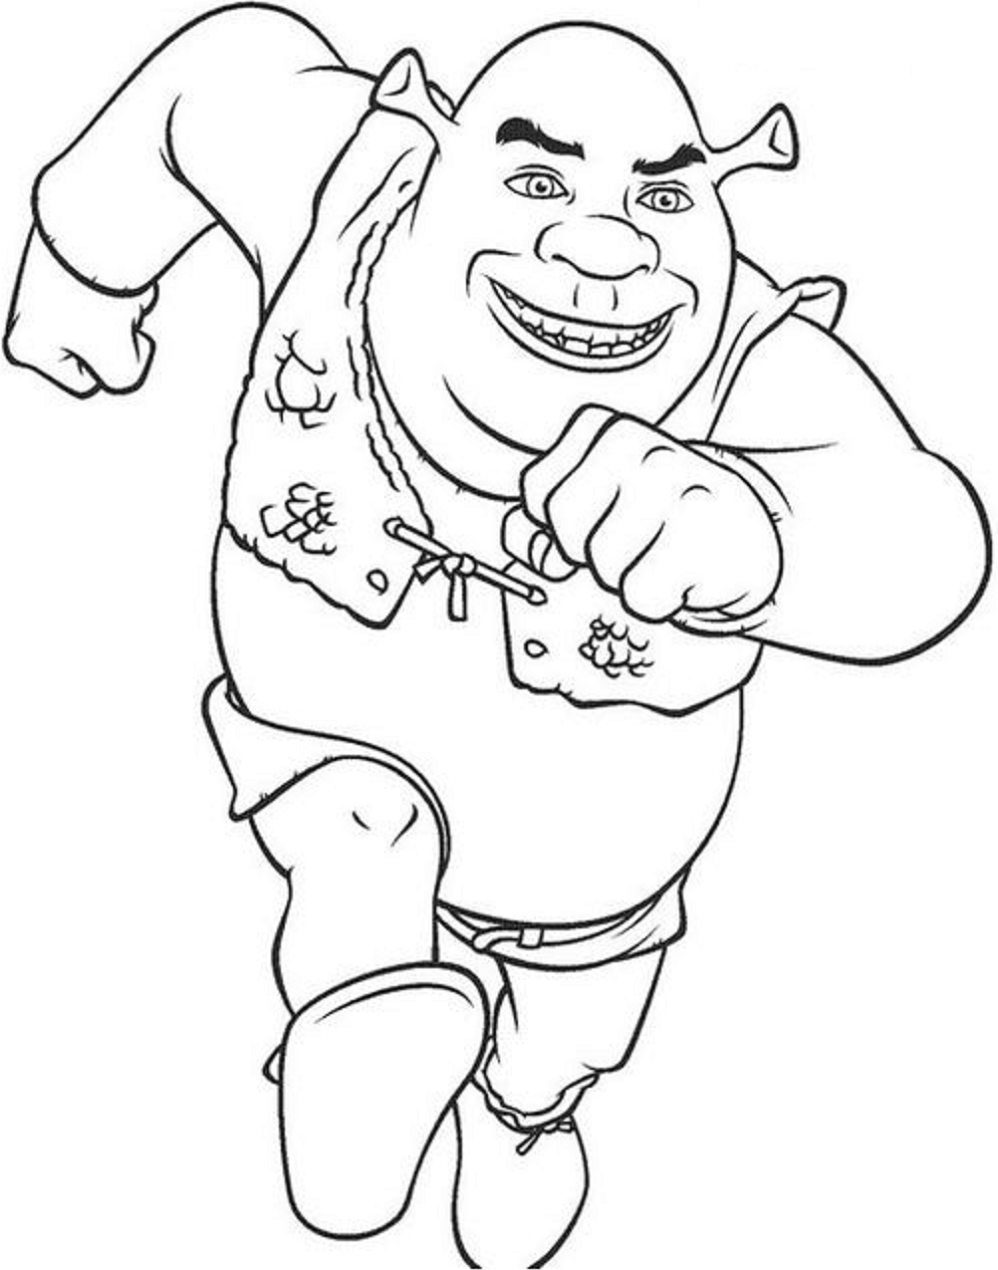 Shrek Is Running Coloring Page Free Printable Coloring Pages for Kids